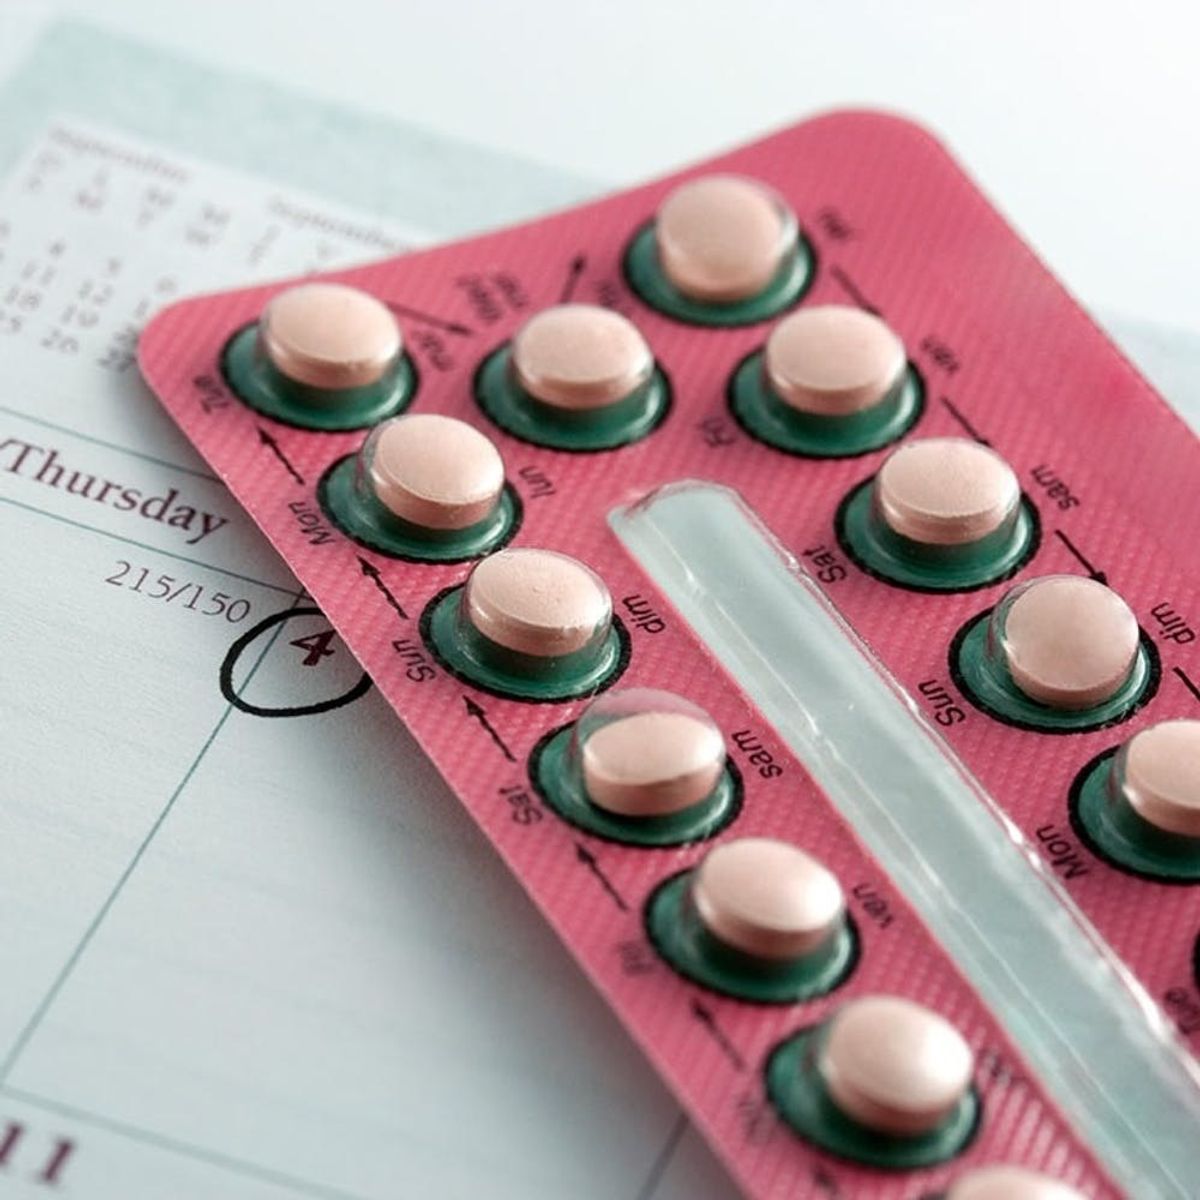 You’ll Never Guess How Many Women Get Pregnant While on the Pill